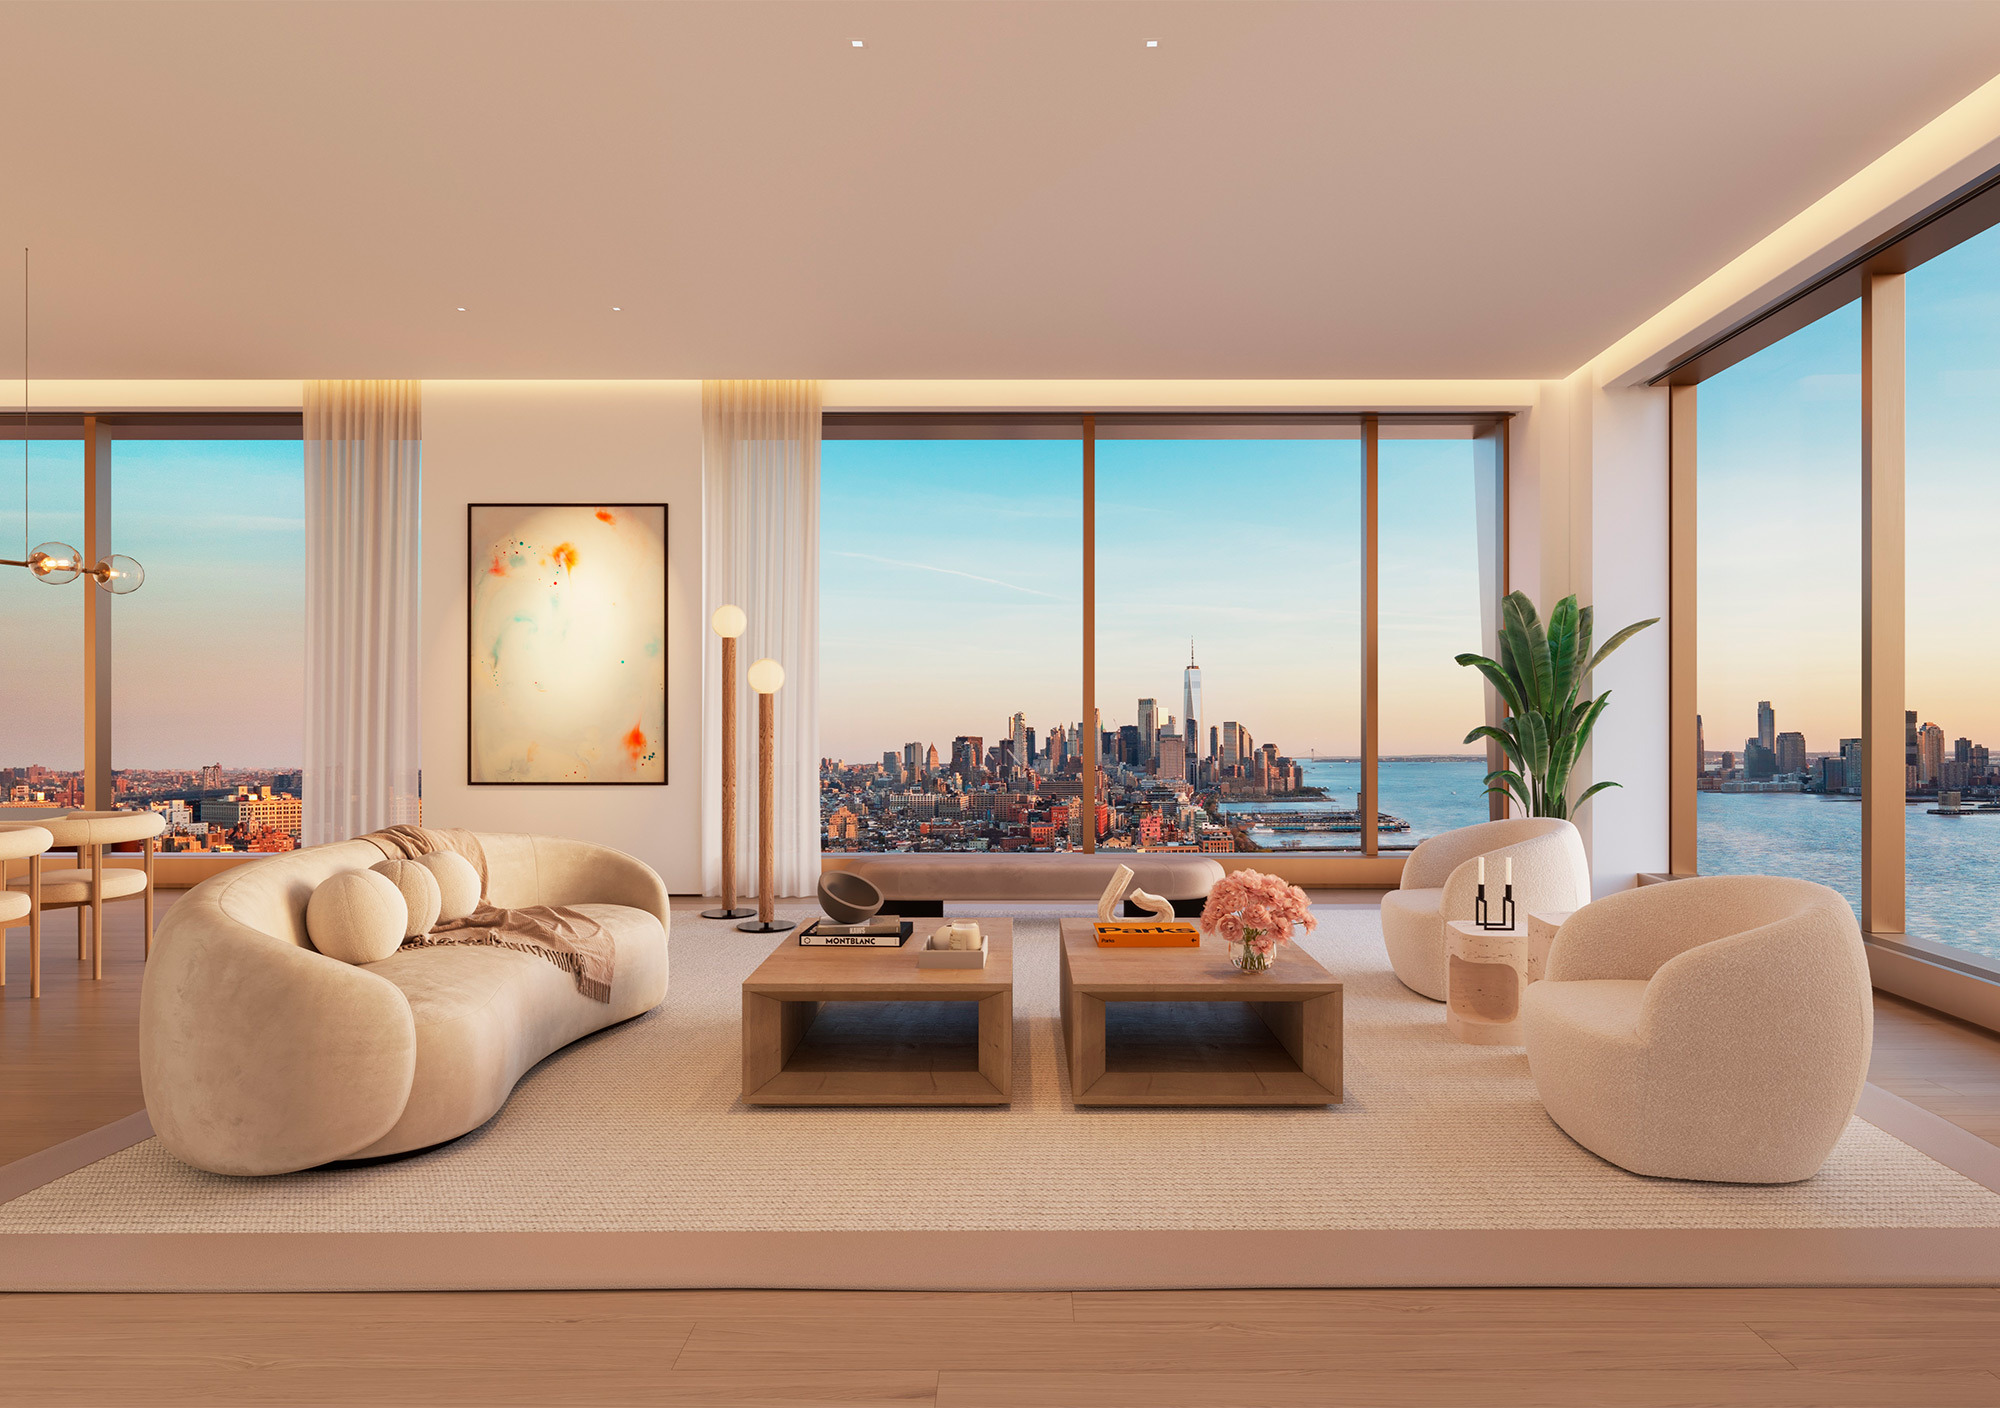 Luxurious living area overlooking the city skyline at sunset